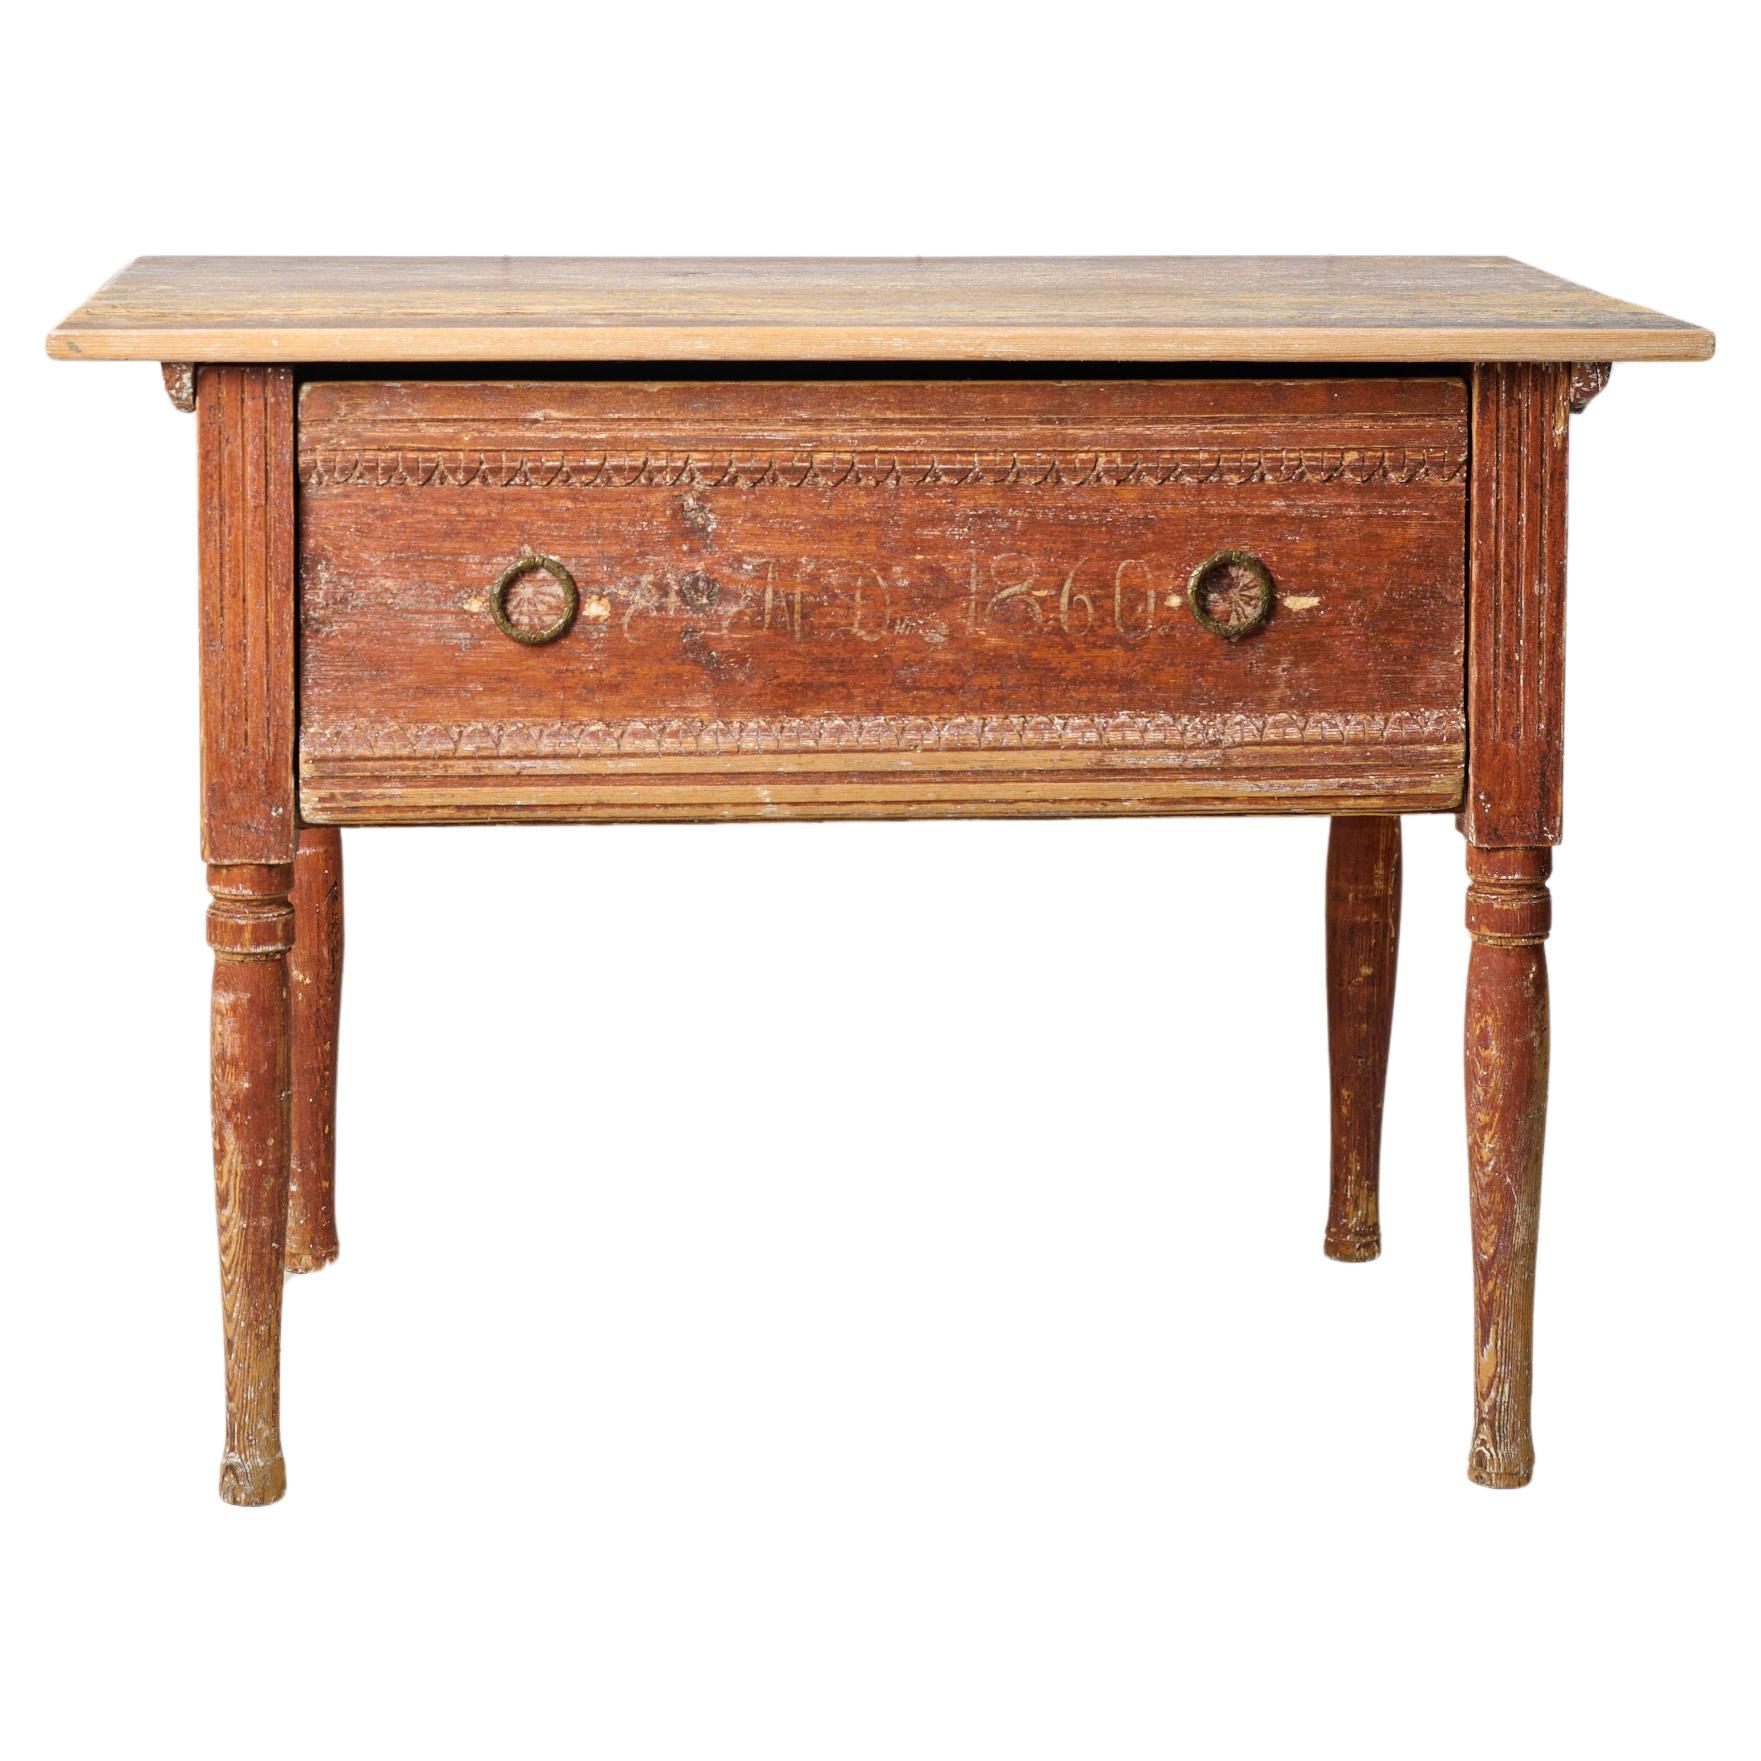 Genuine Antique Swedish Rustic Low Country Table with Drawer For Sale